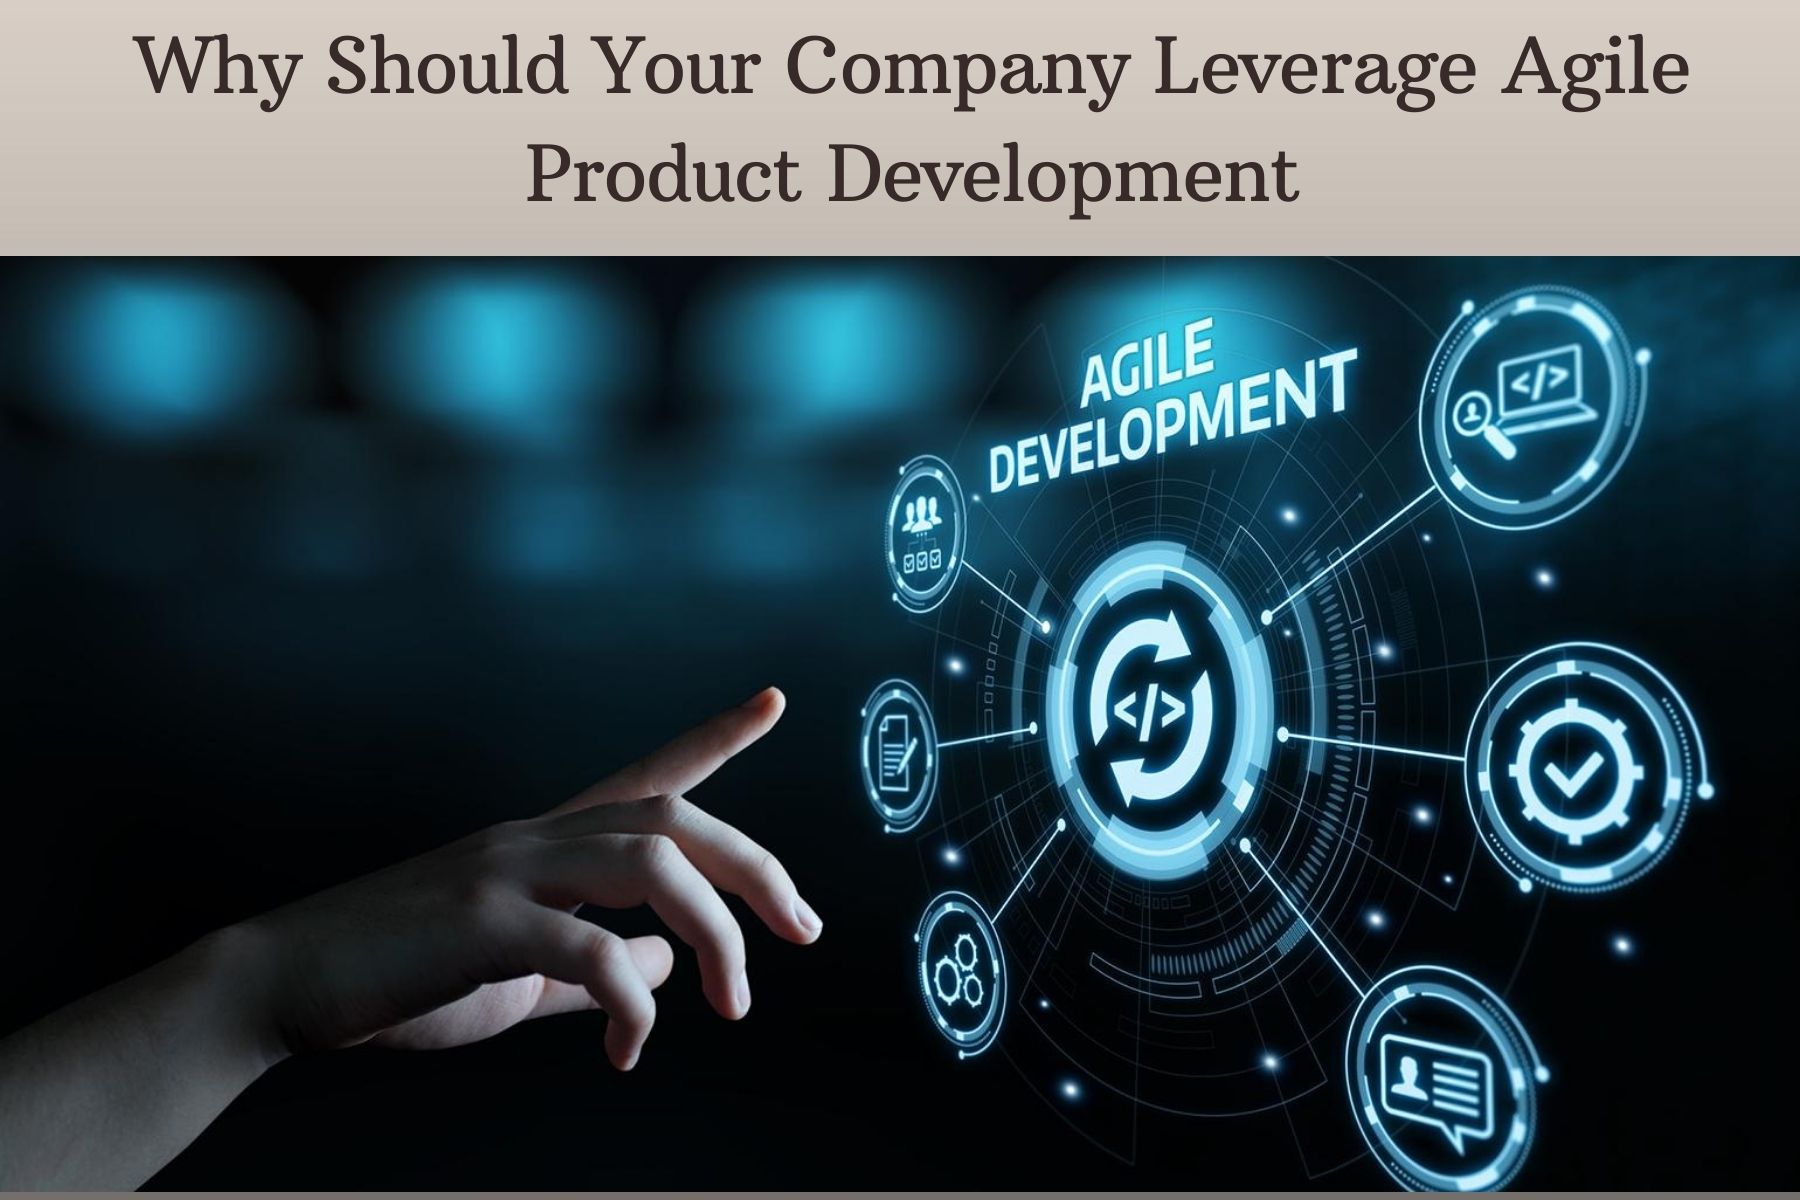 Why Should Your Company Leverage Agile Product Development?